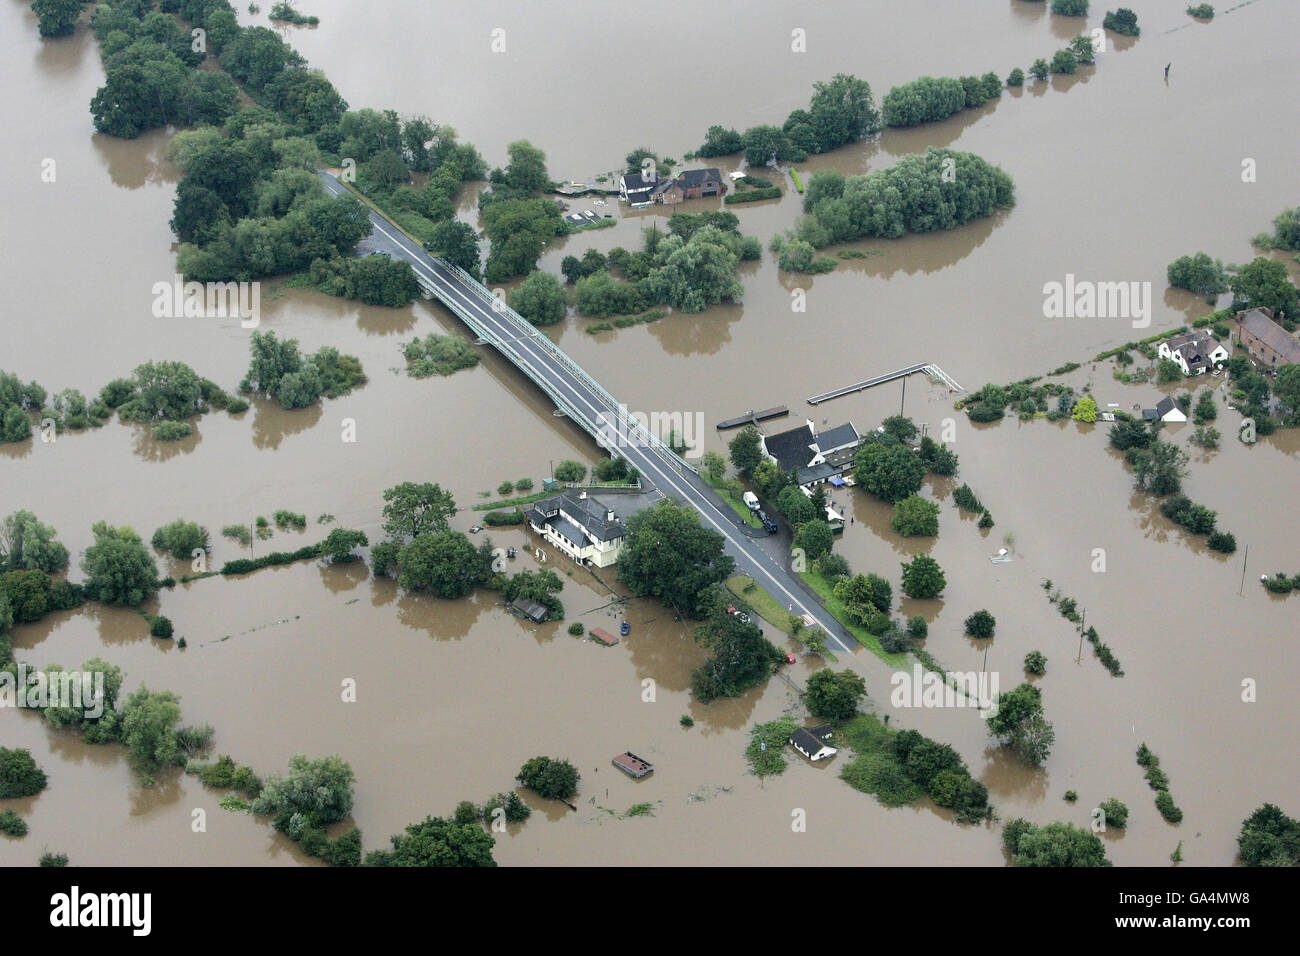 Storms hit the UK. A bridge emerges from flood water near Tewkesbury, Gloucestershire. Stock Photo